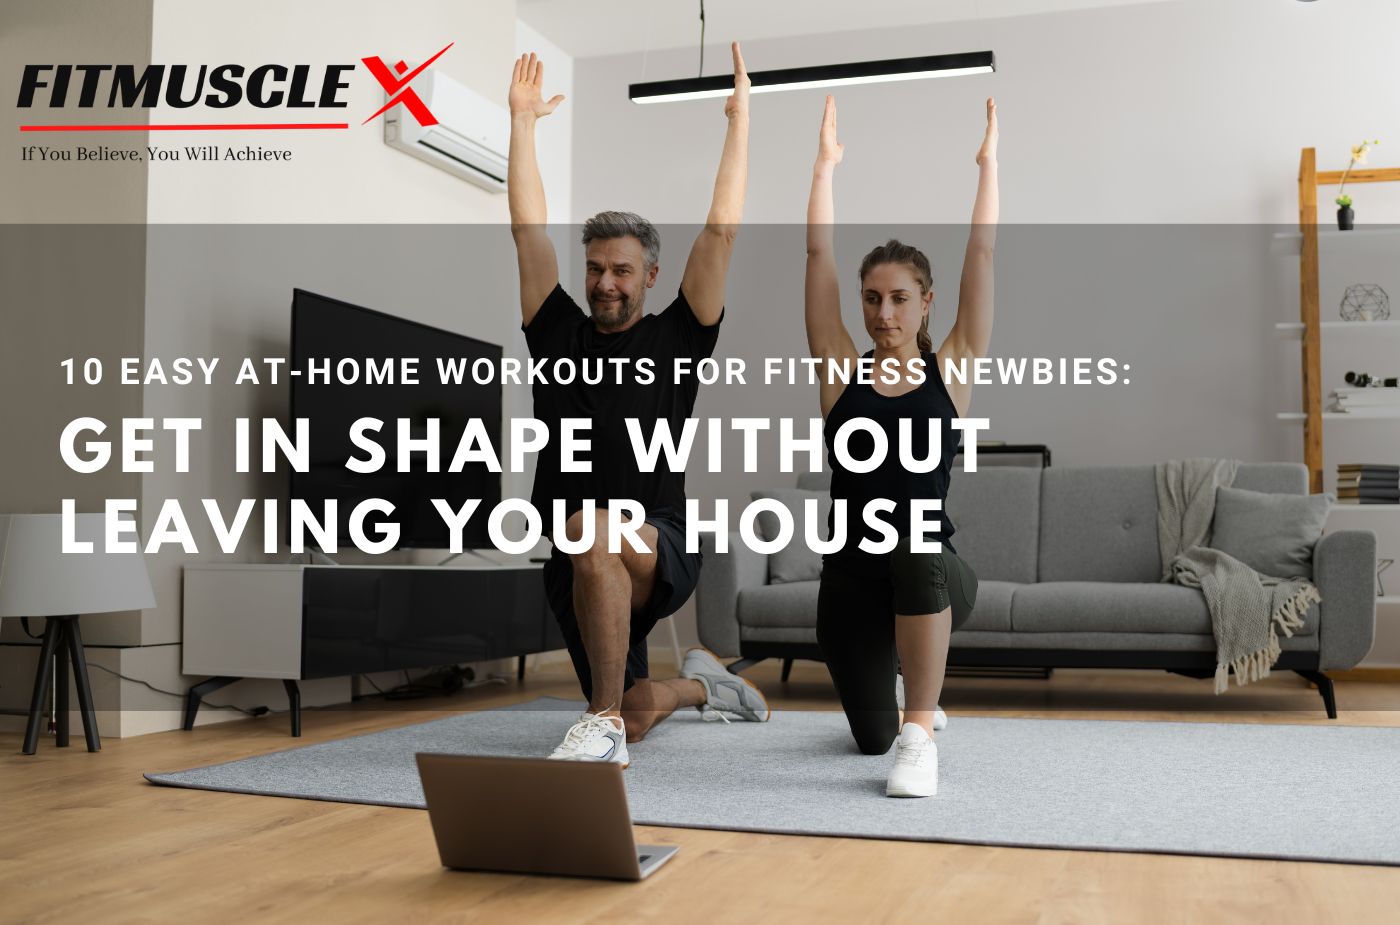 10 Easy At-Home Workouts for Fitness Newbies Get in Shape without Leaving Your House